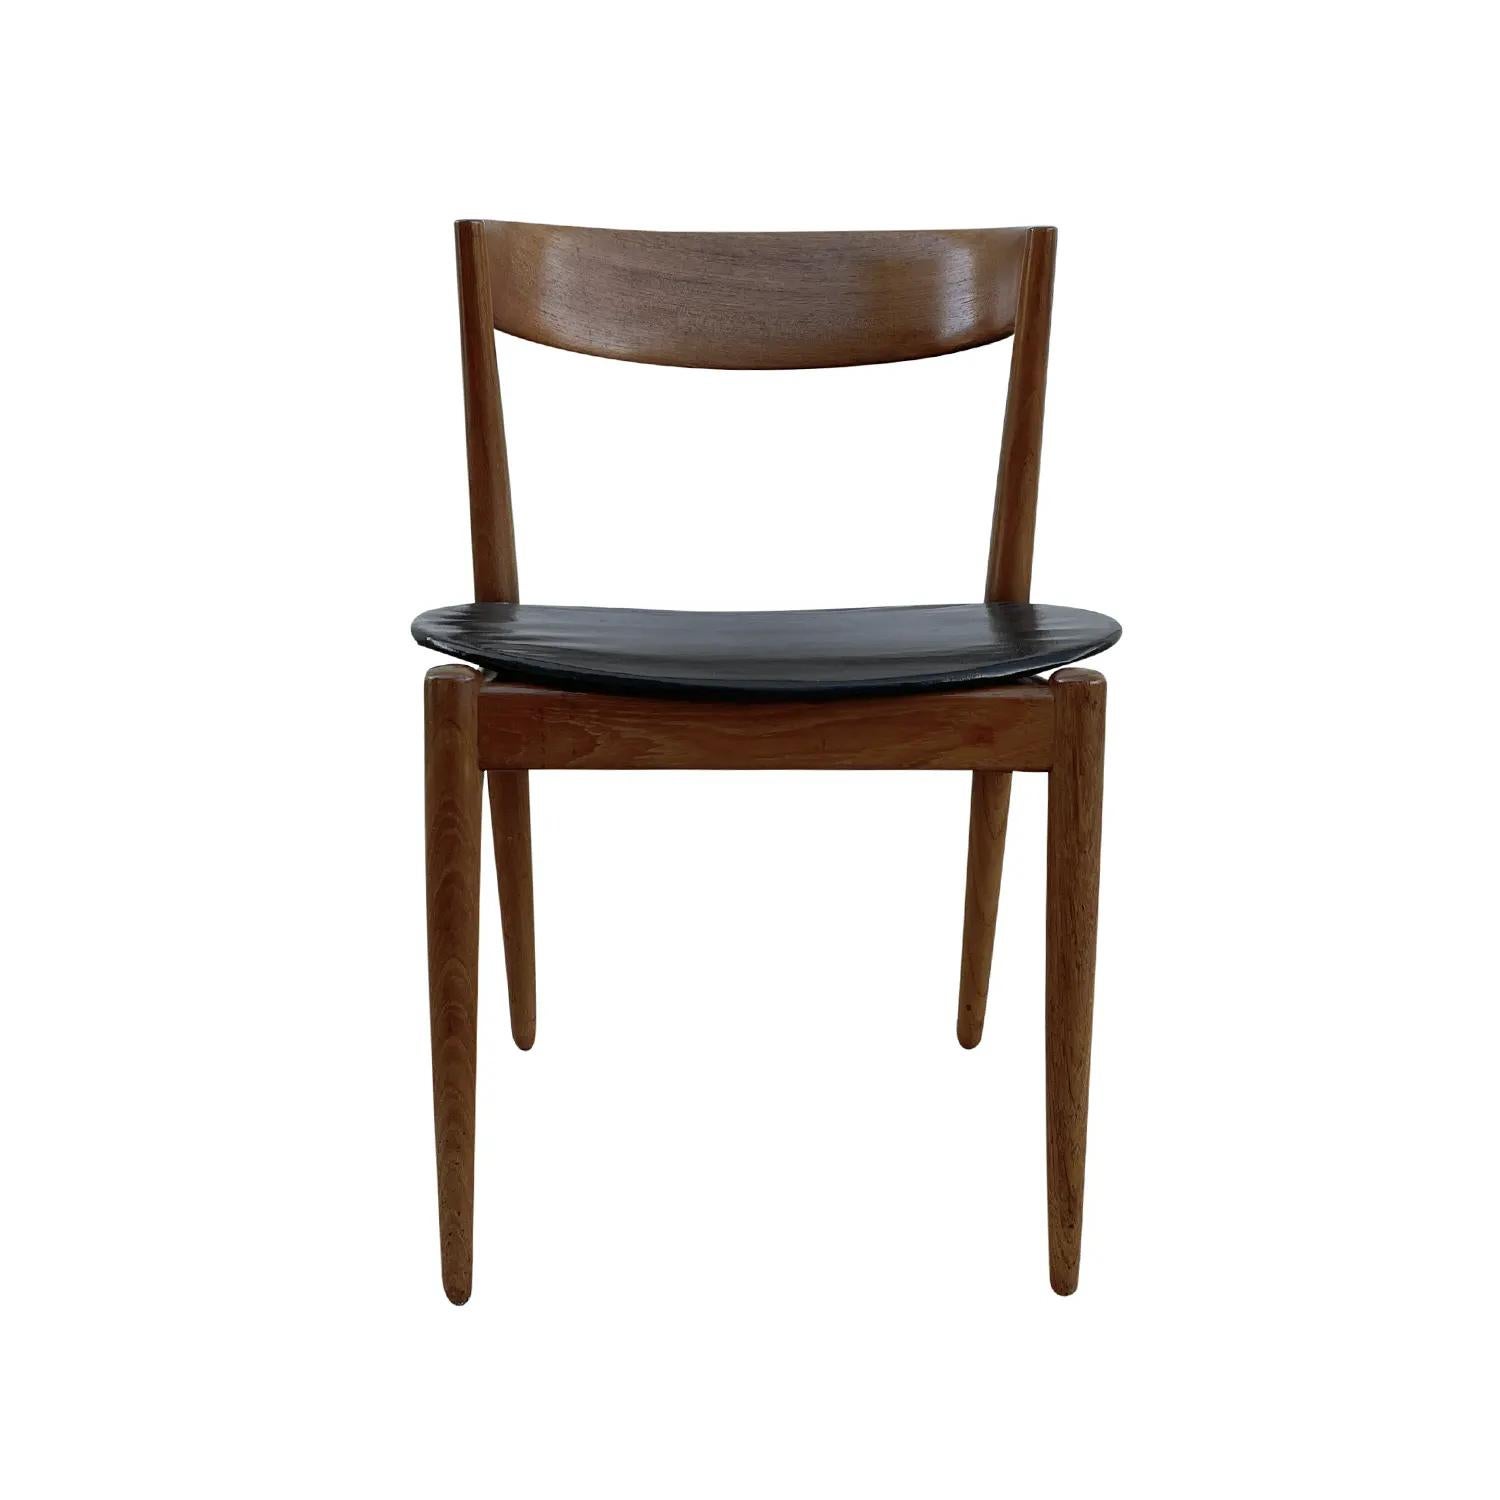 A dark-brown, vintage Mid-Century Modern Danish side chair made of hand crafted polished Teakwood, in good condition. The Scandinavian corner, end chair has a curved slim backrest, standing on four wooden legs. The seat cover is made of black faux